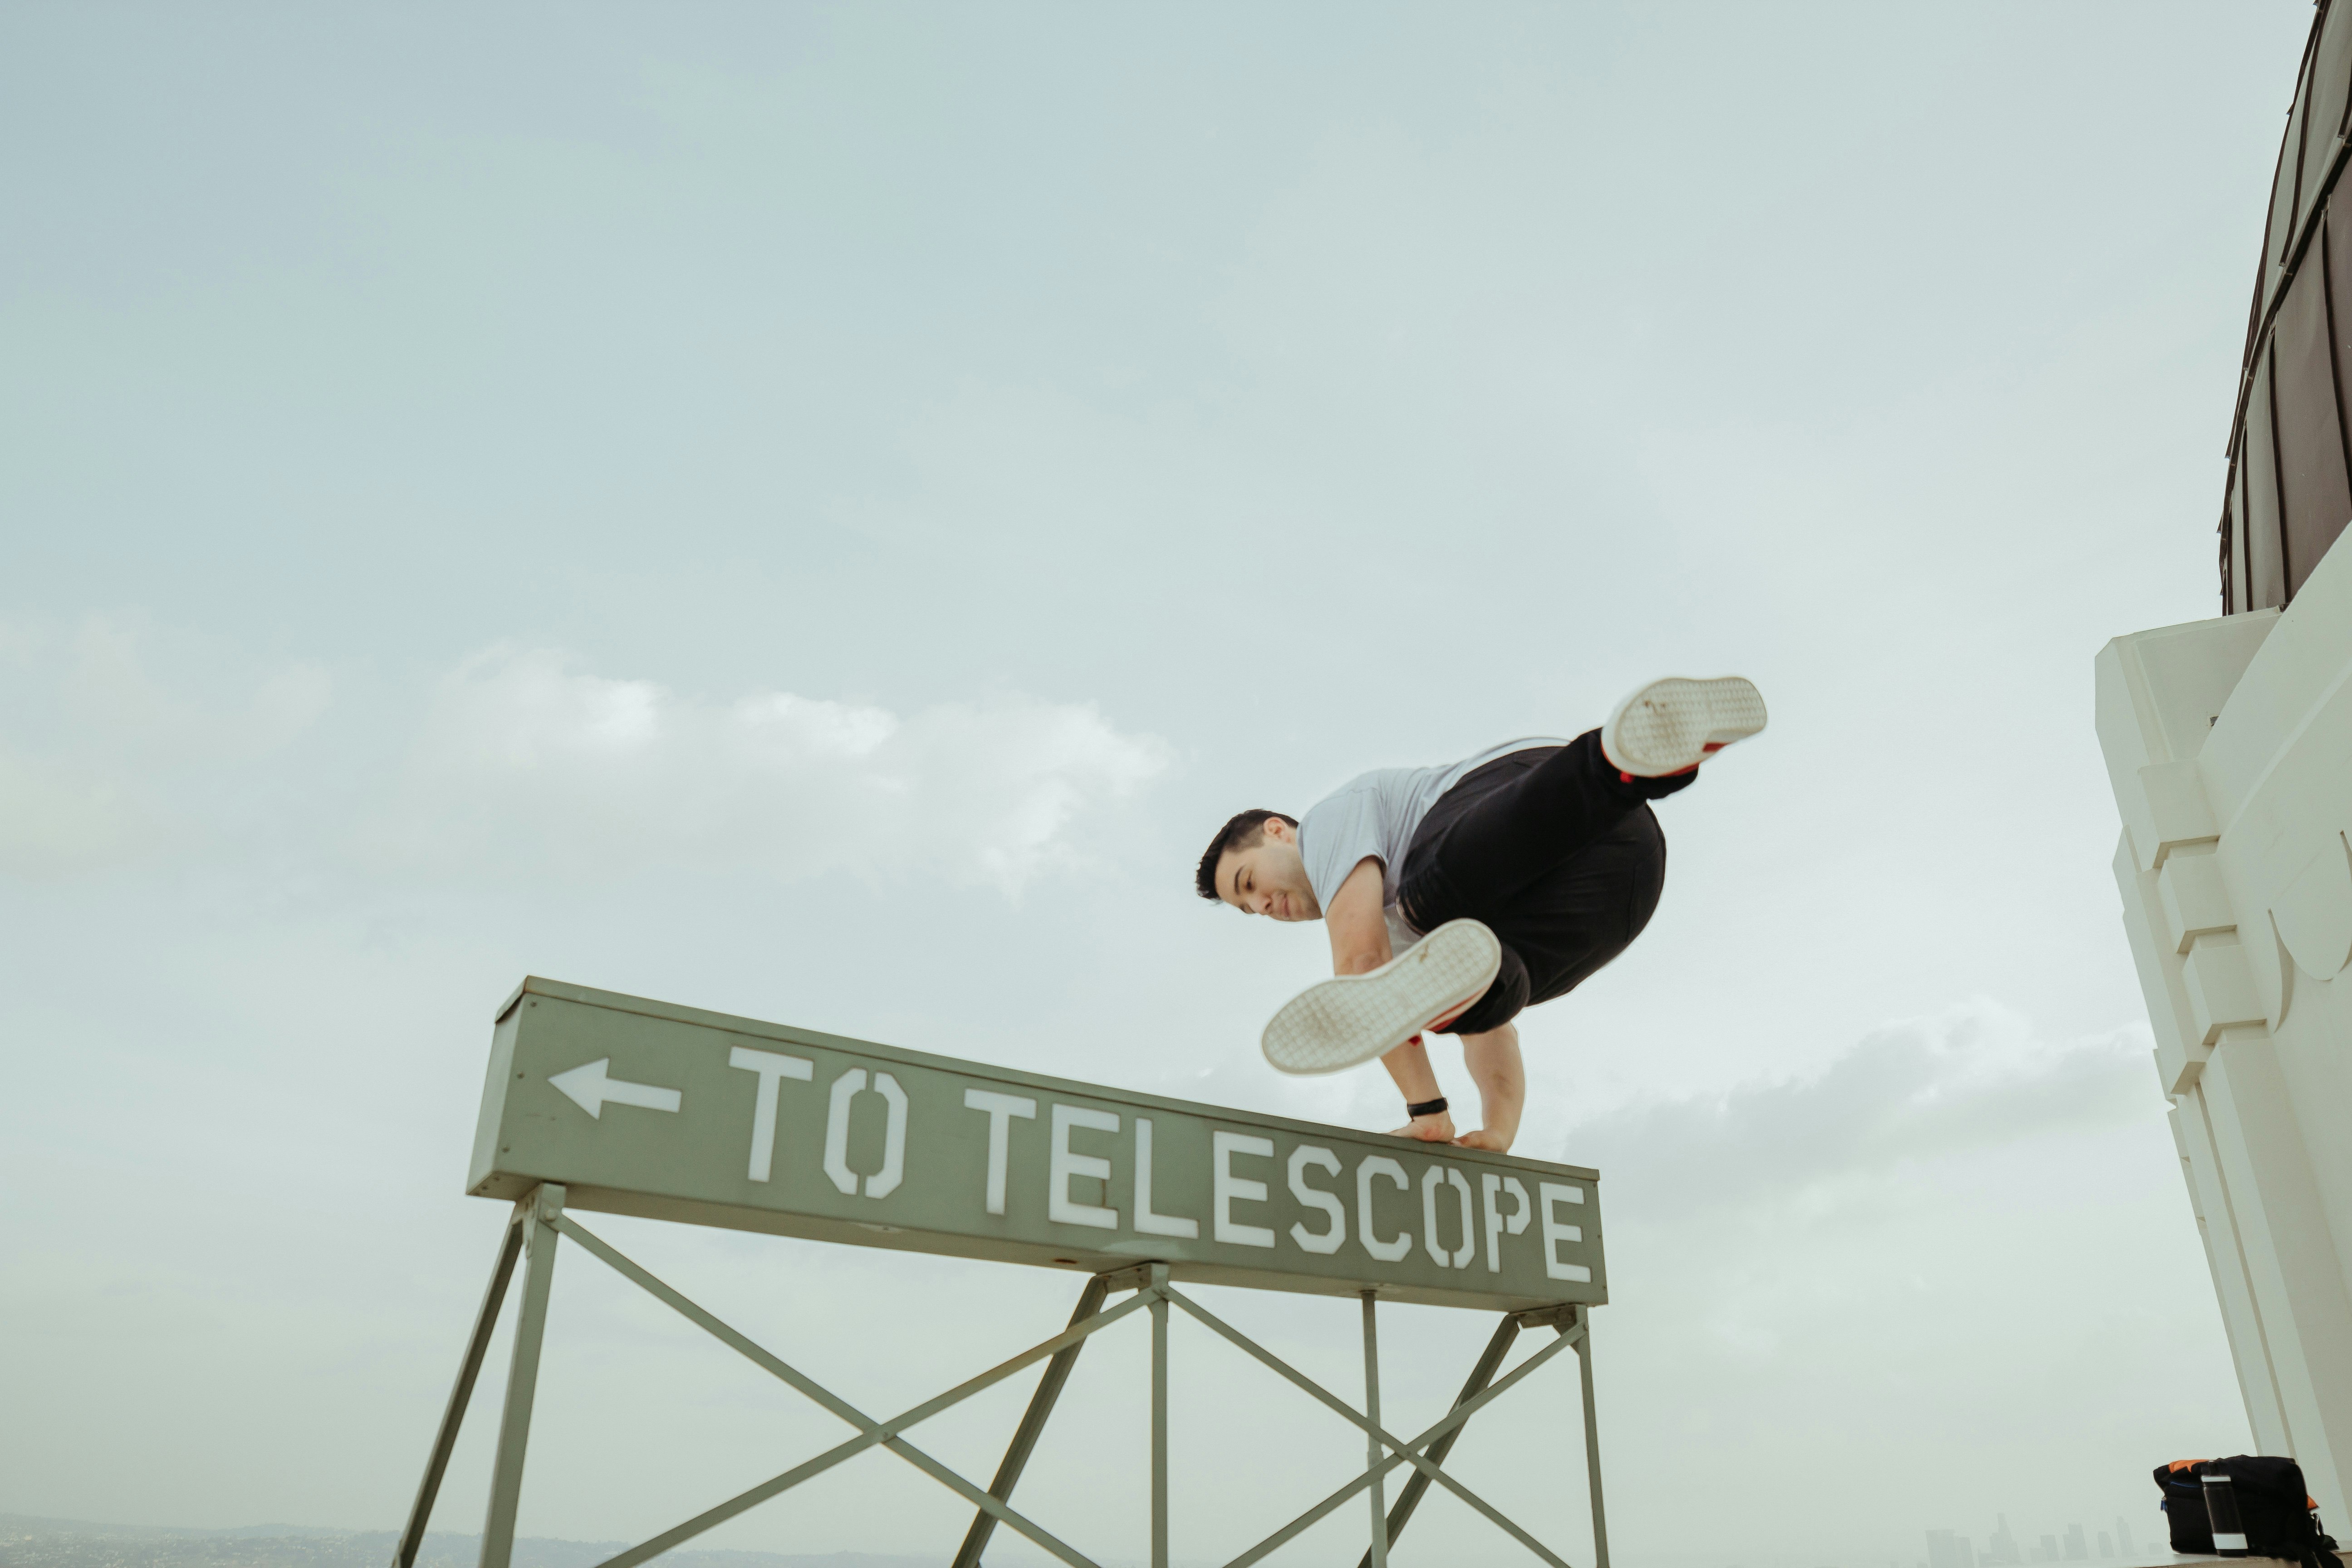 man jumping over to telescope signage